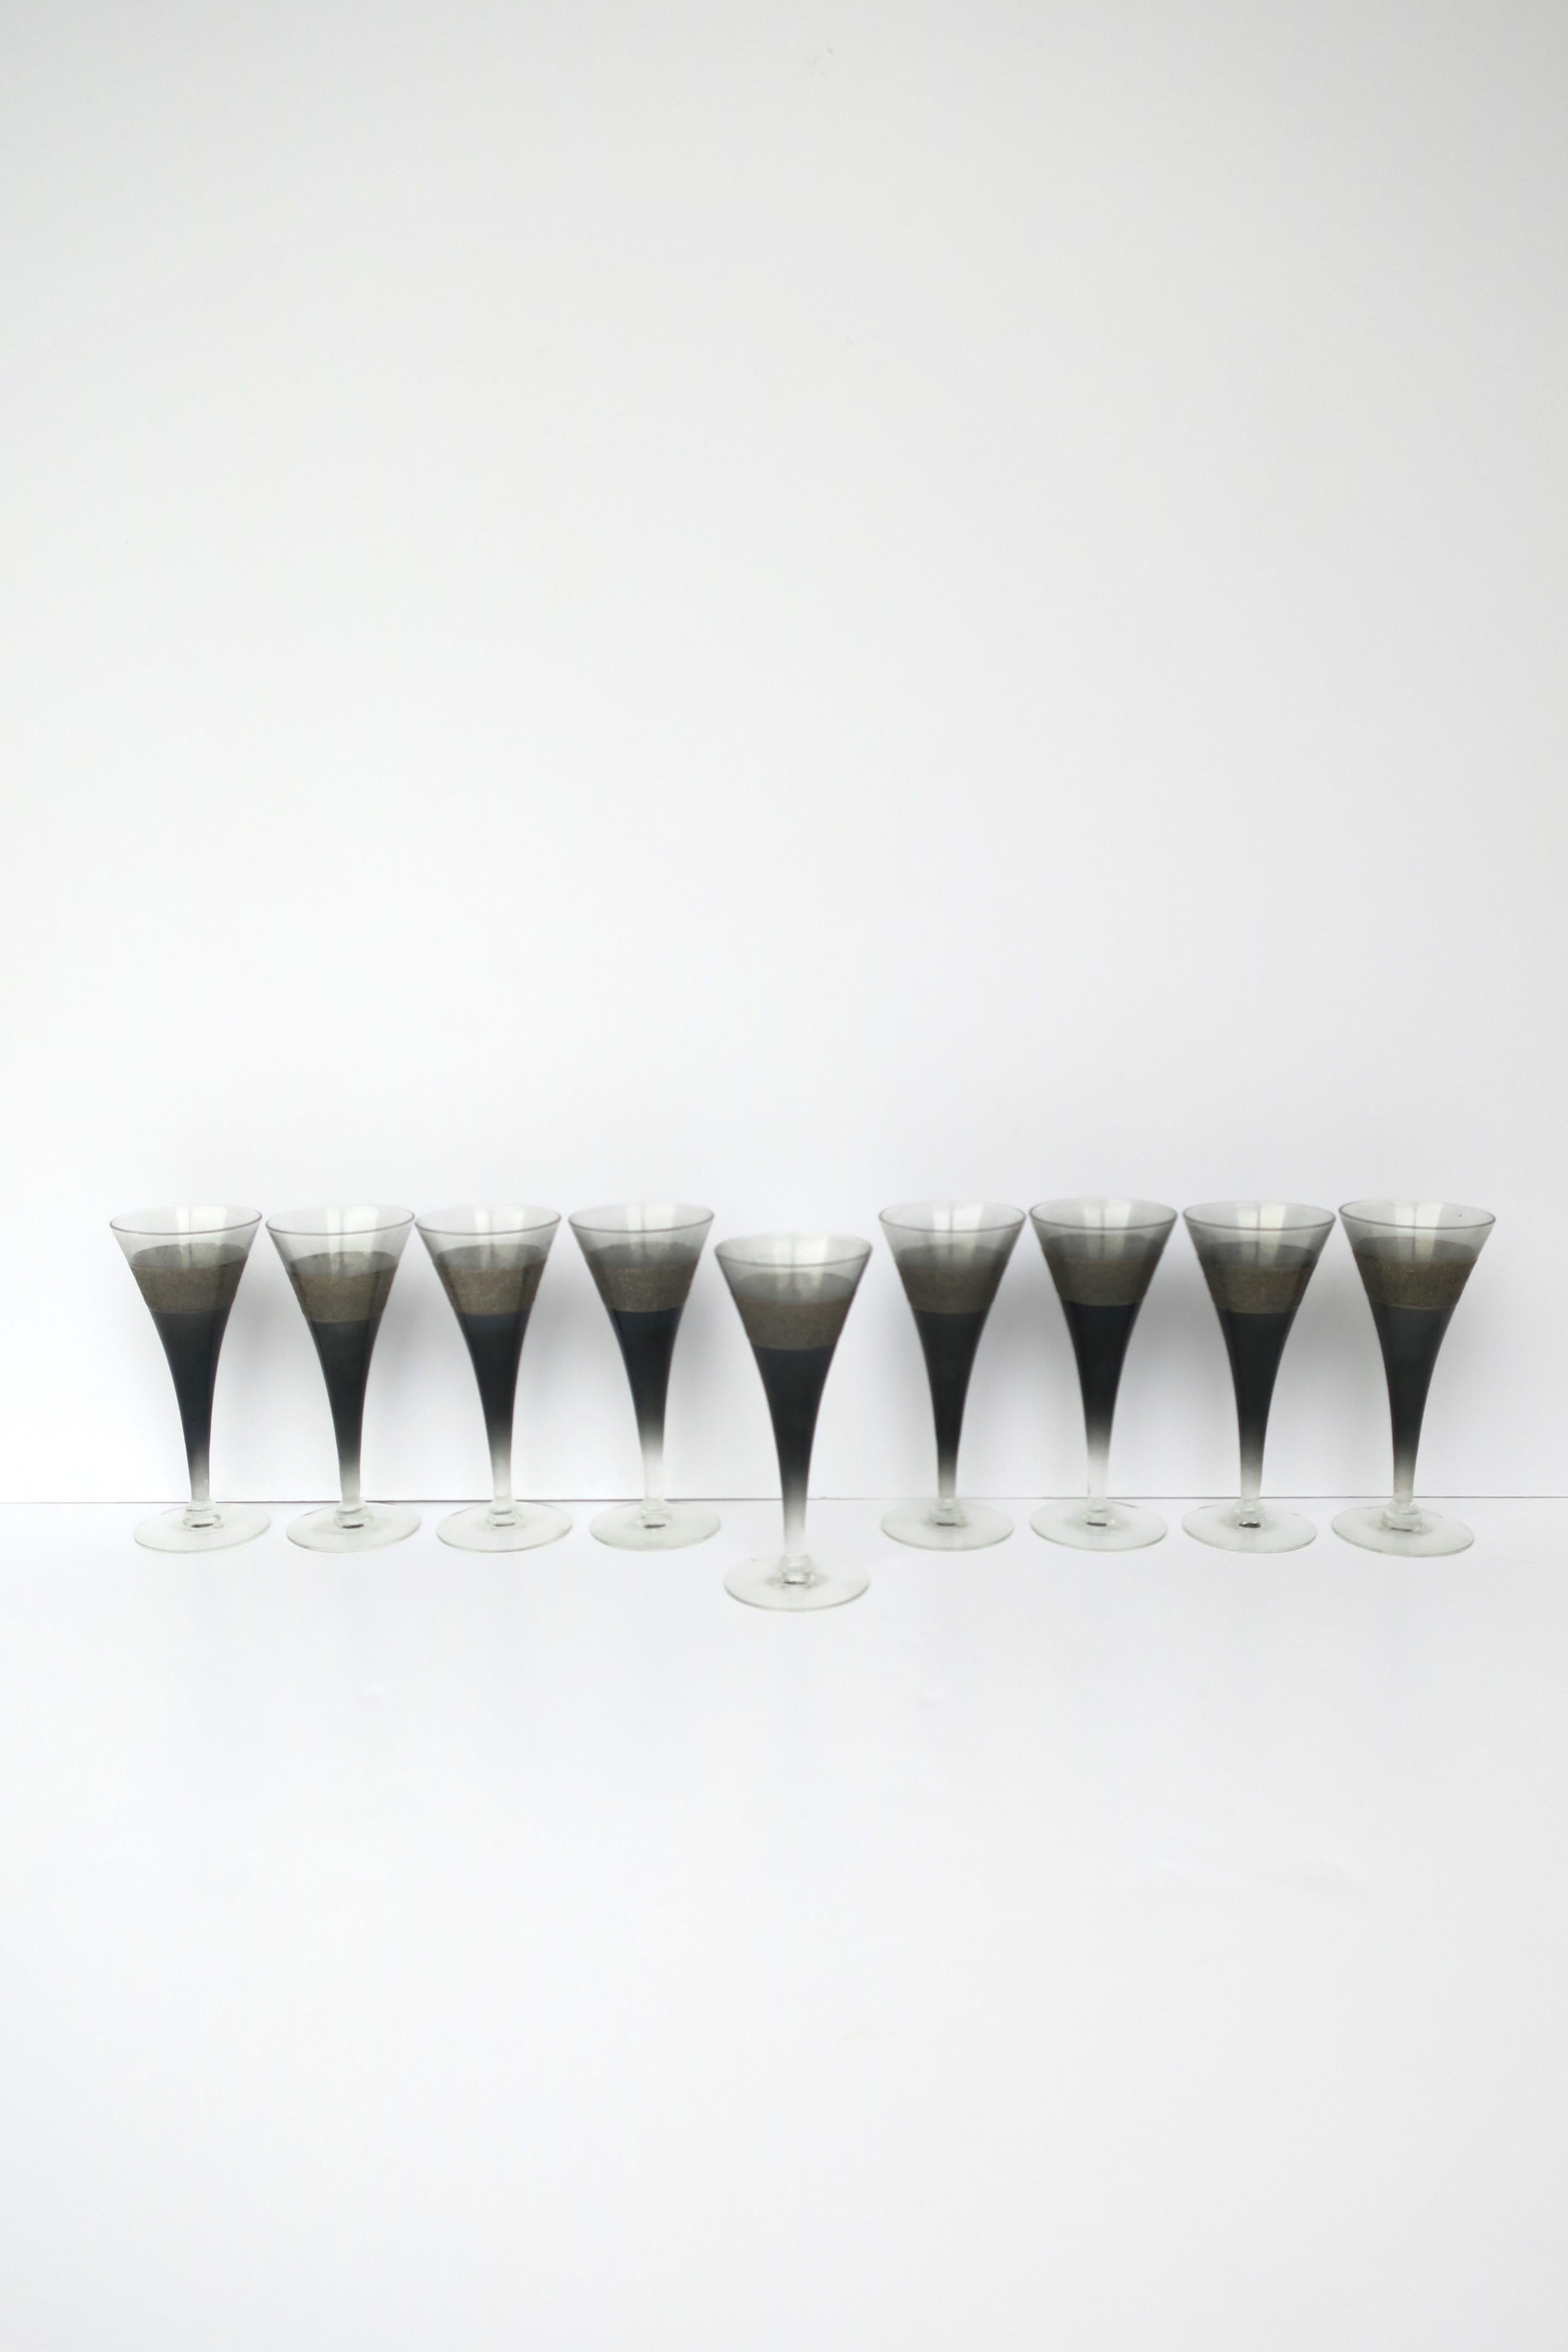 Polychromed Champagne Flutes Glasses in Black & Silver, circa 1960s For Sale